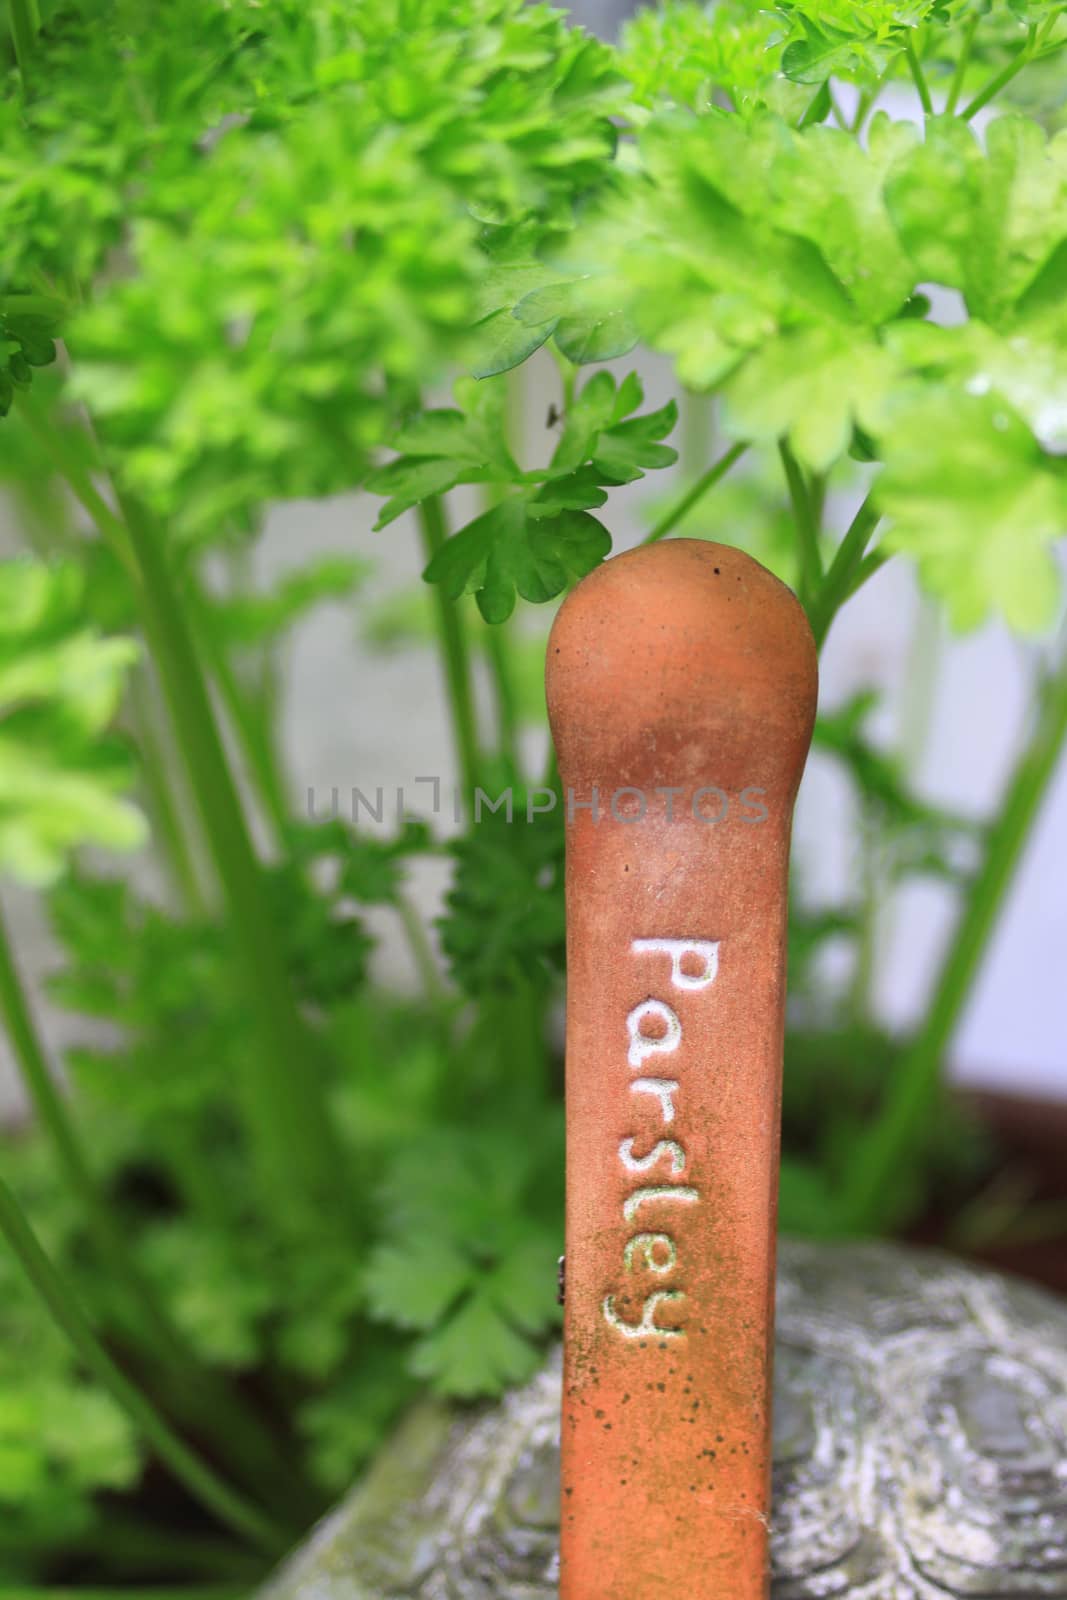 A Terrcotta herb marker for parsley. Set on a portrait format with green leafed parsley in the background.